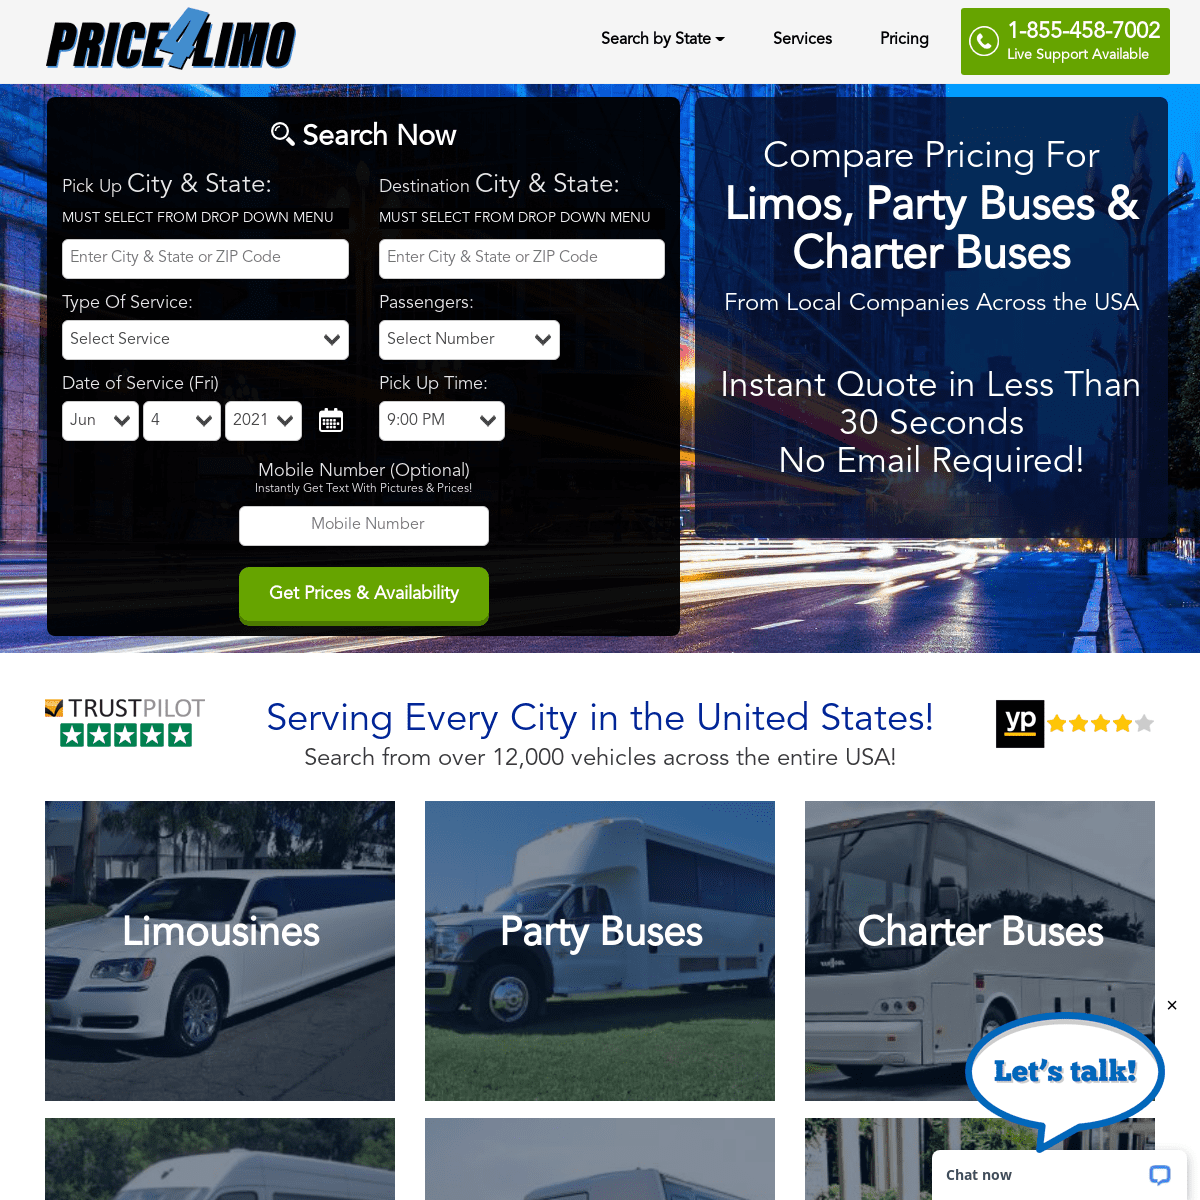 A complete backup of https://price4limo.com